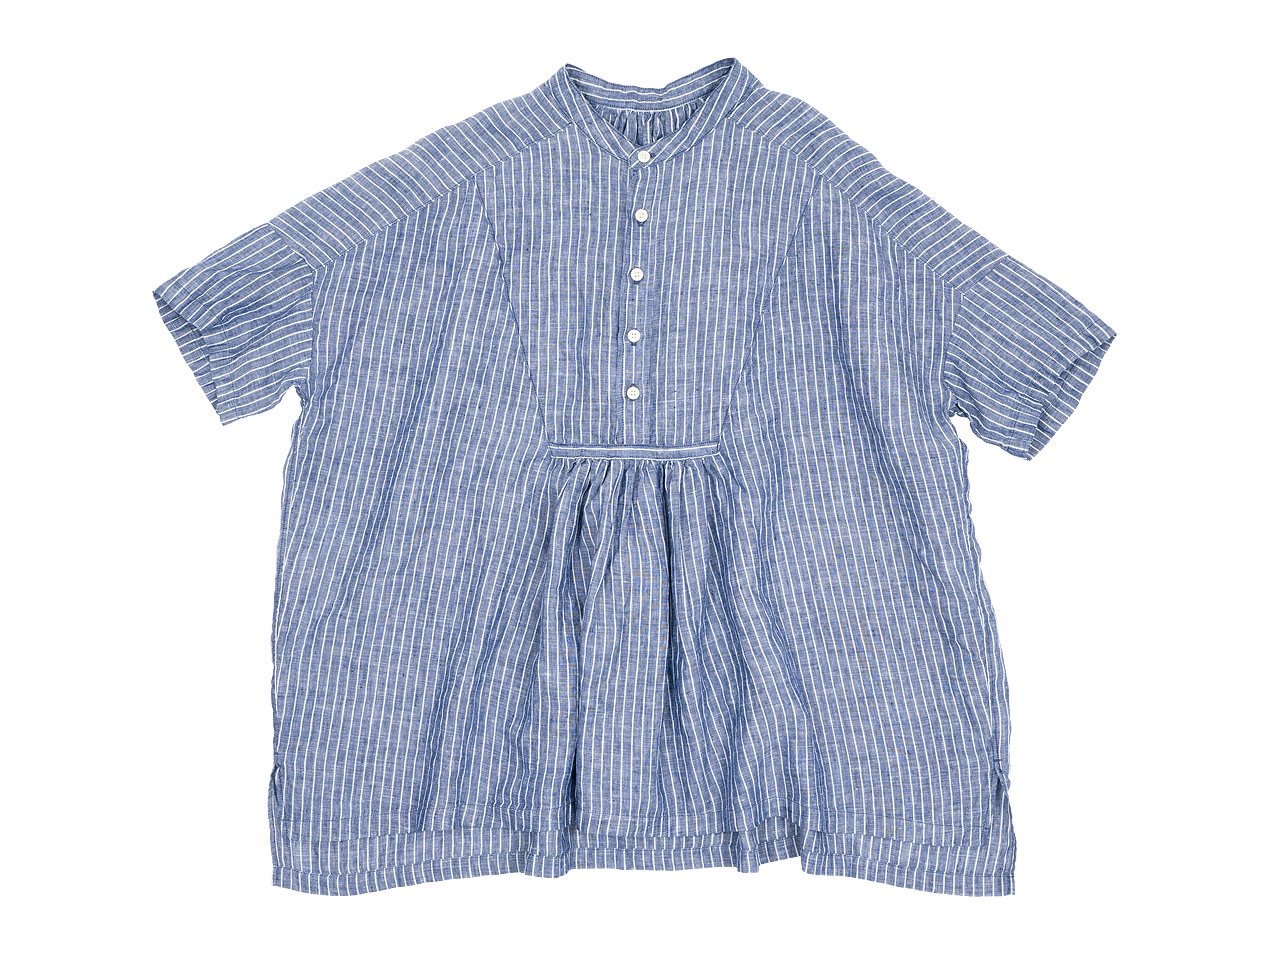 ordinary fits WIDE ATELIER SHIRTS NAVY STRIPE